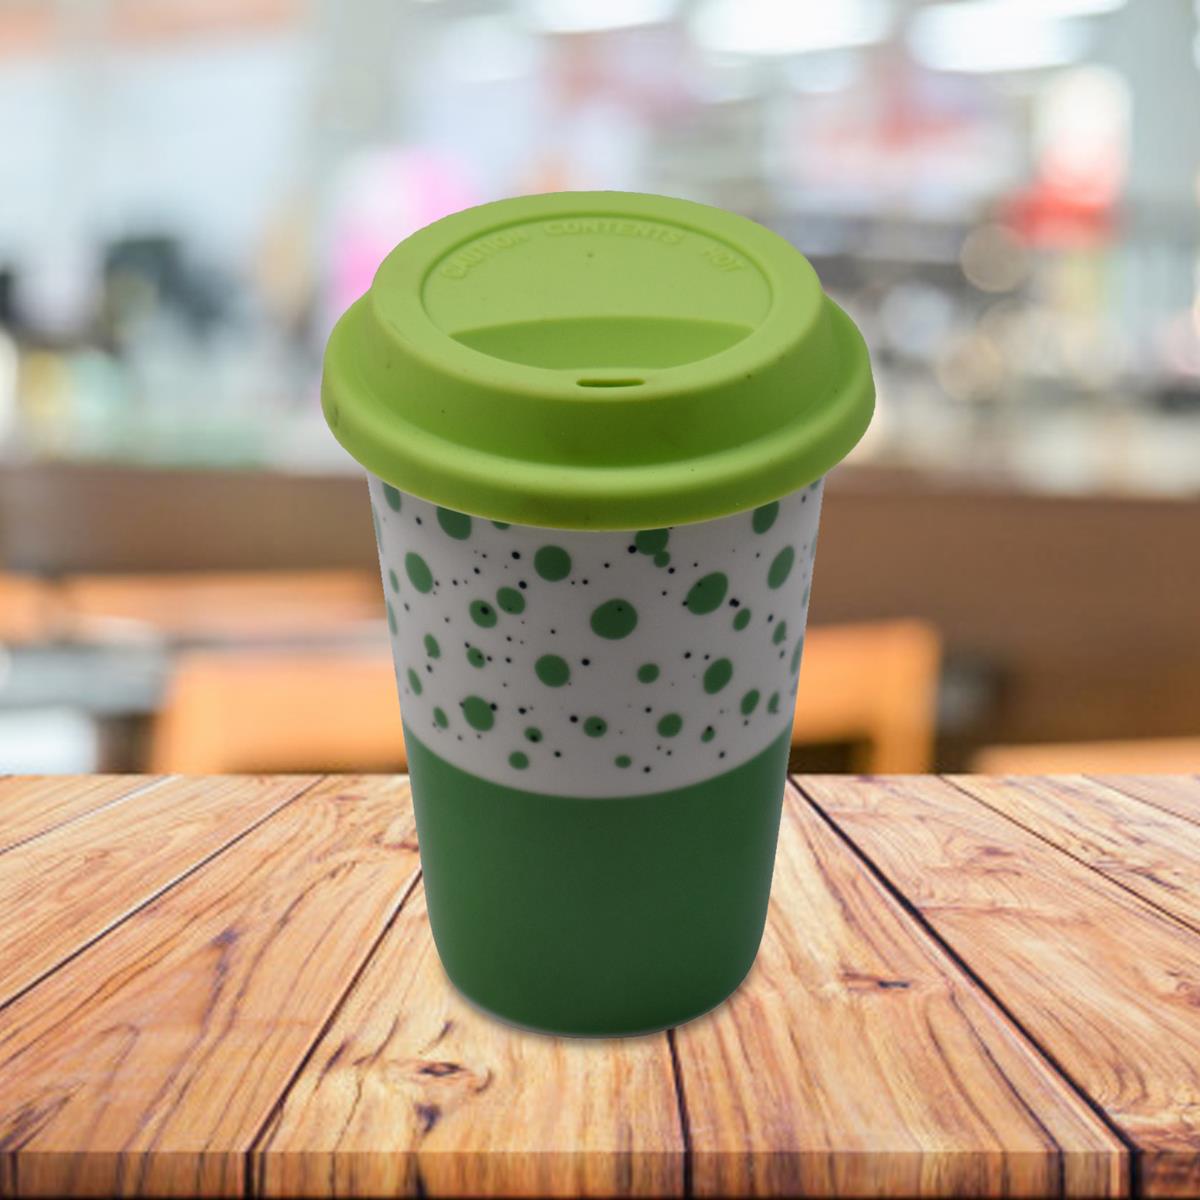 Kookee Ceramic Coffee or Tea Tall Tumbler with Silicone Lid for Office, Home or Gifting - 275ml (BPM4724-C)